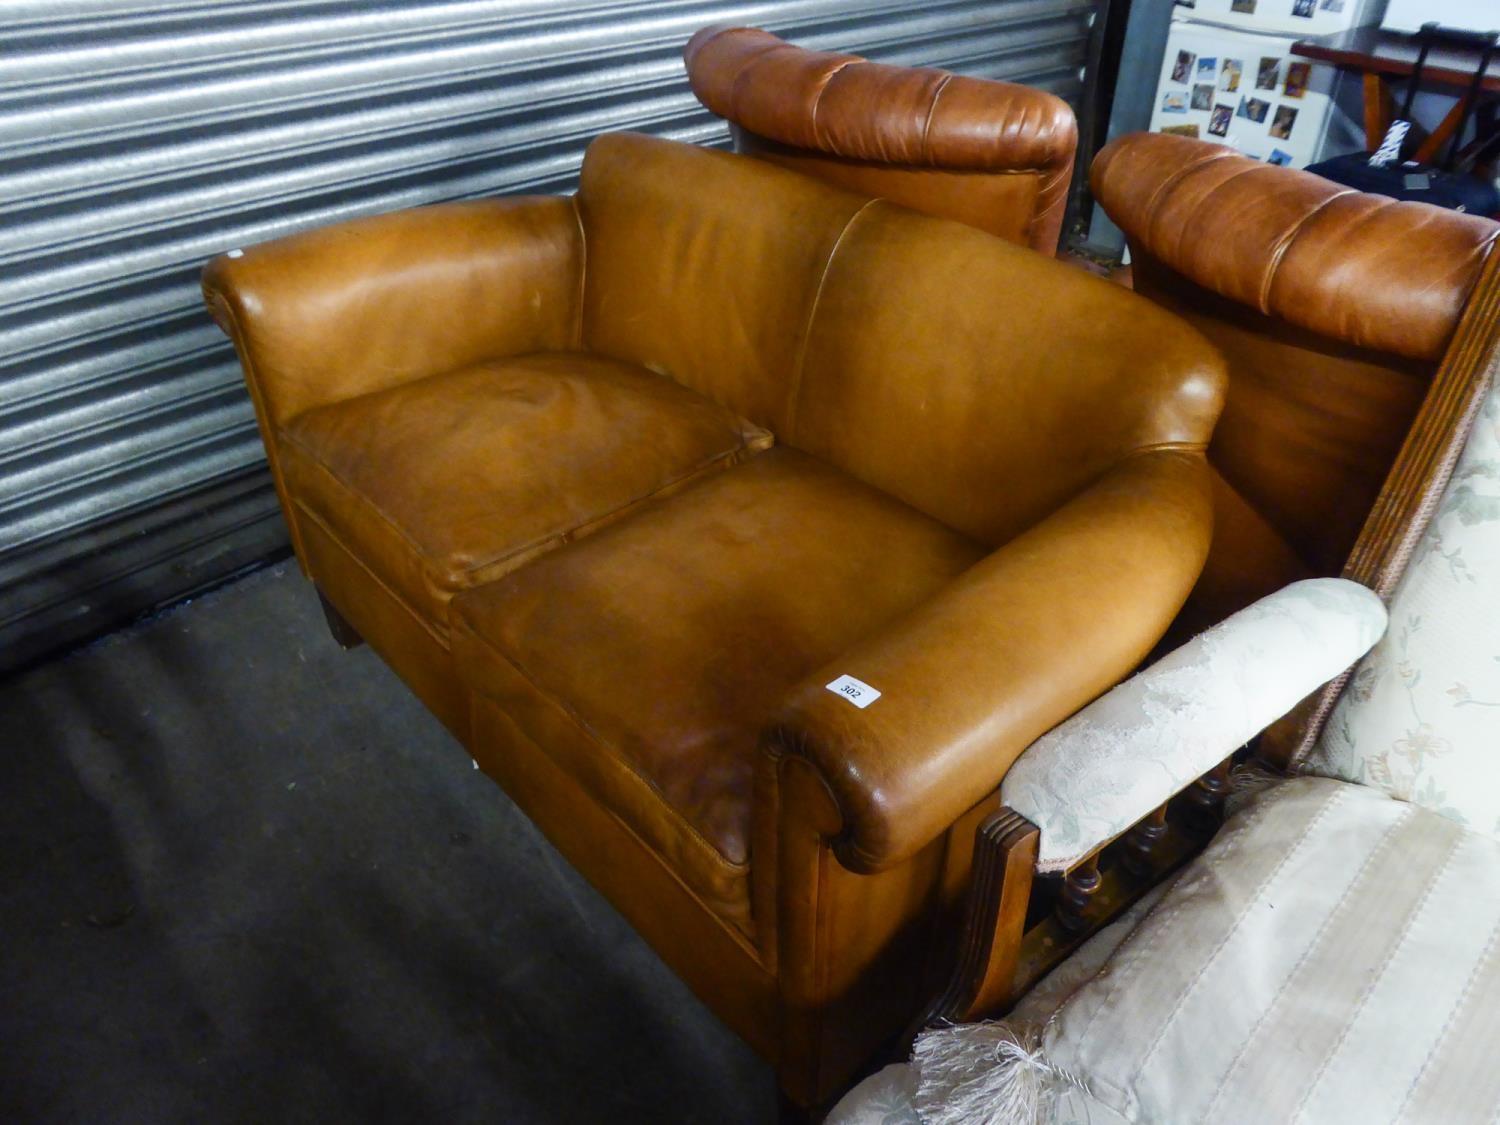 ATTRACTIVE MID-TAN LEATHER SMALL TRADITIONAL TWO SEATER SETTEE, WITH LOOSE SEAT CUSHIONS, ON